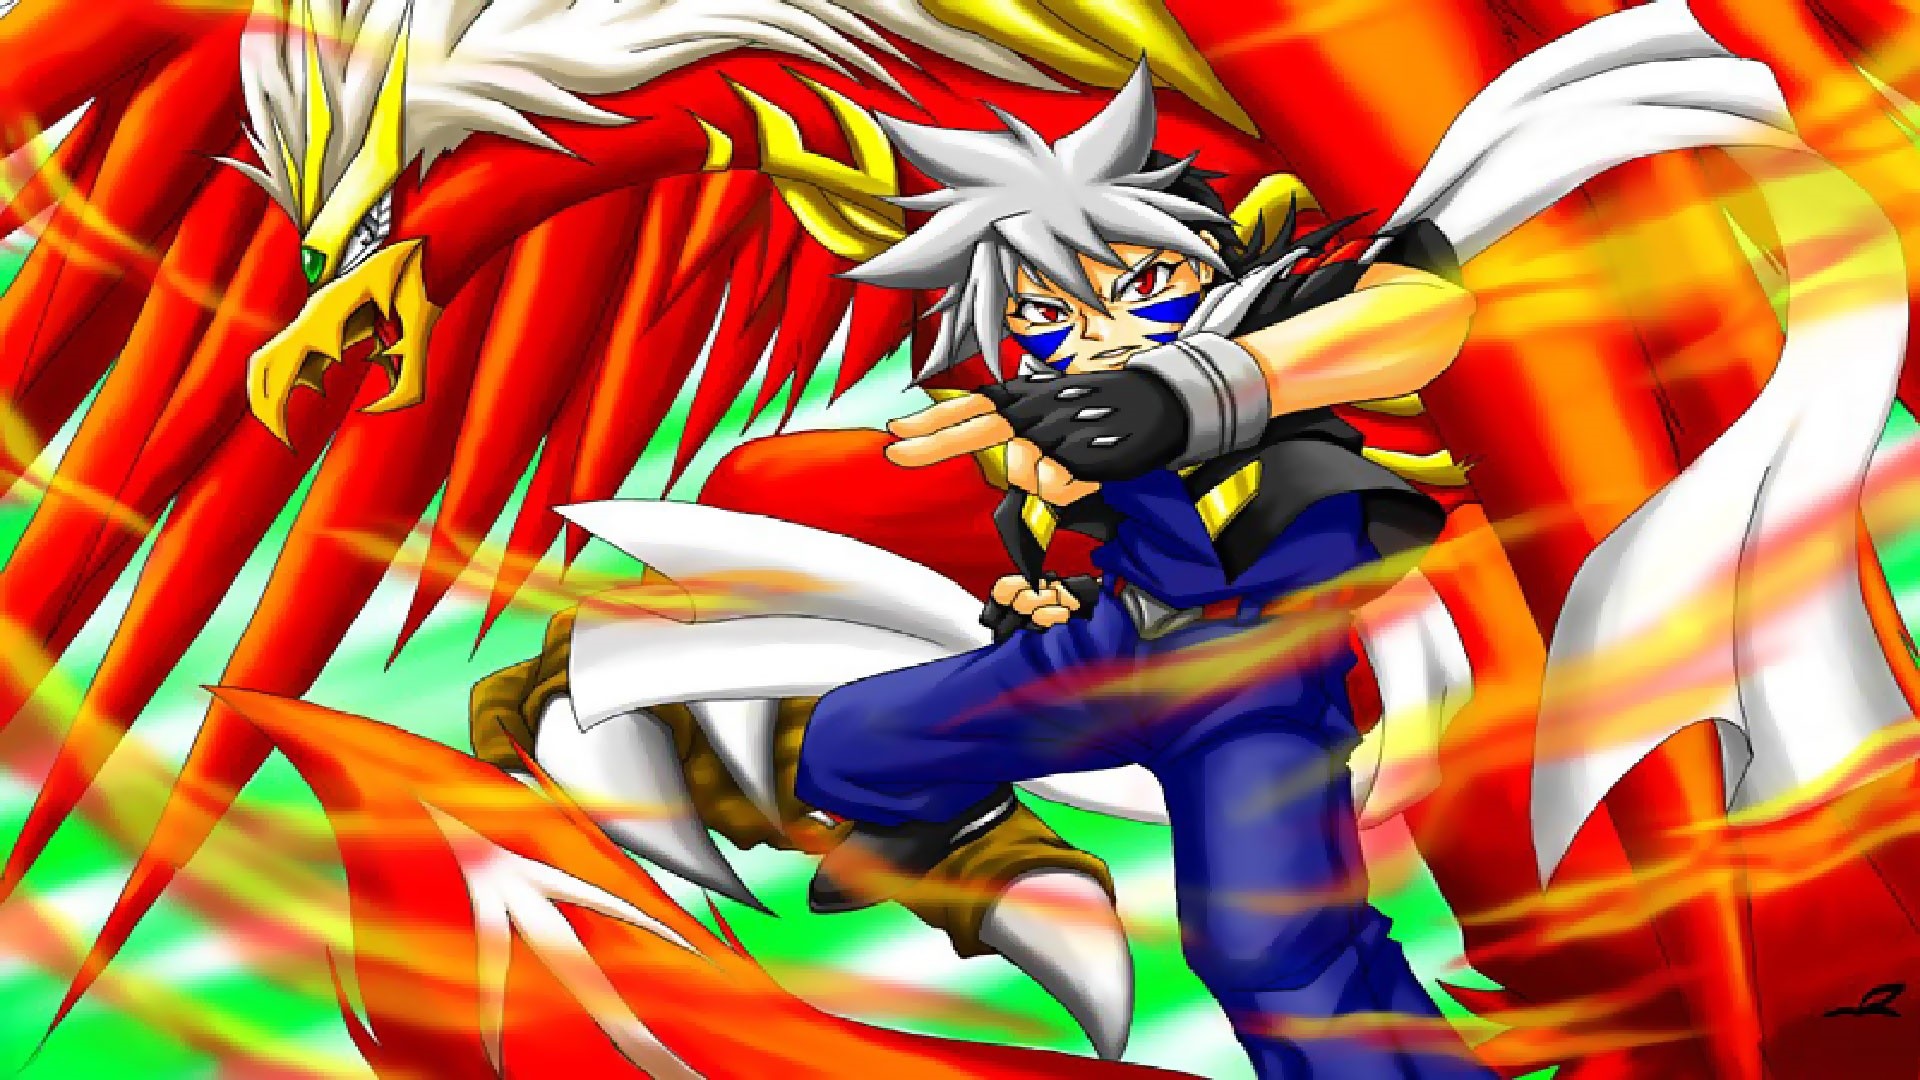 Beyblade HD Wallpaper (70+ images)